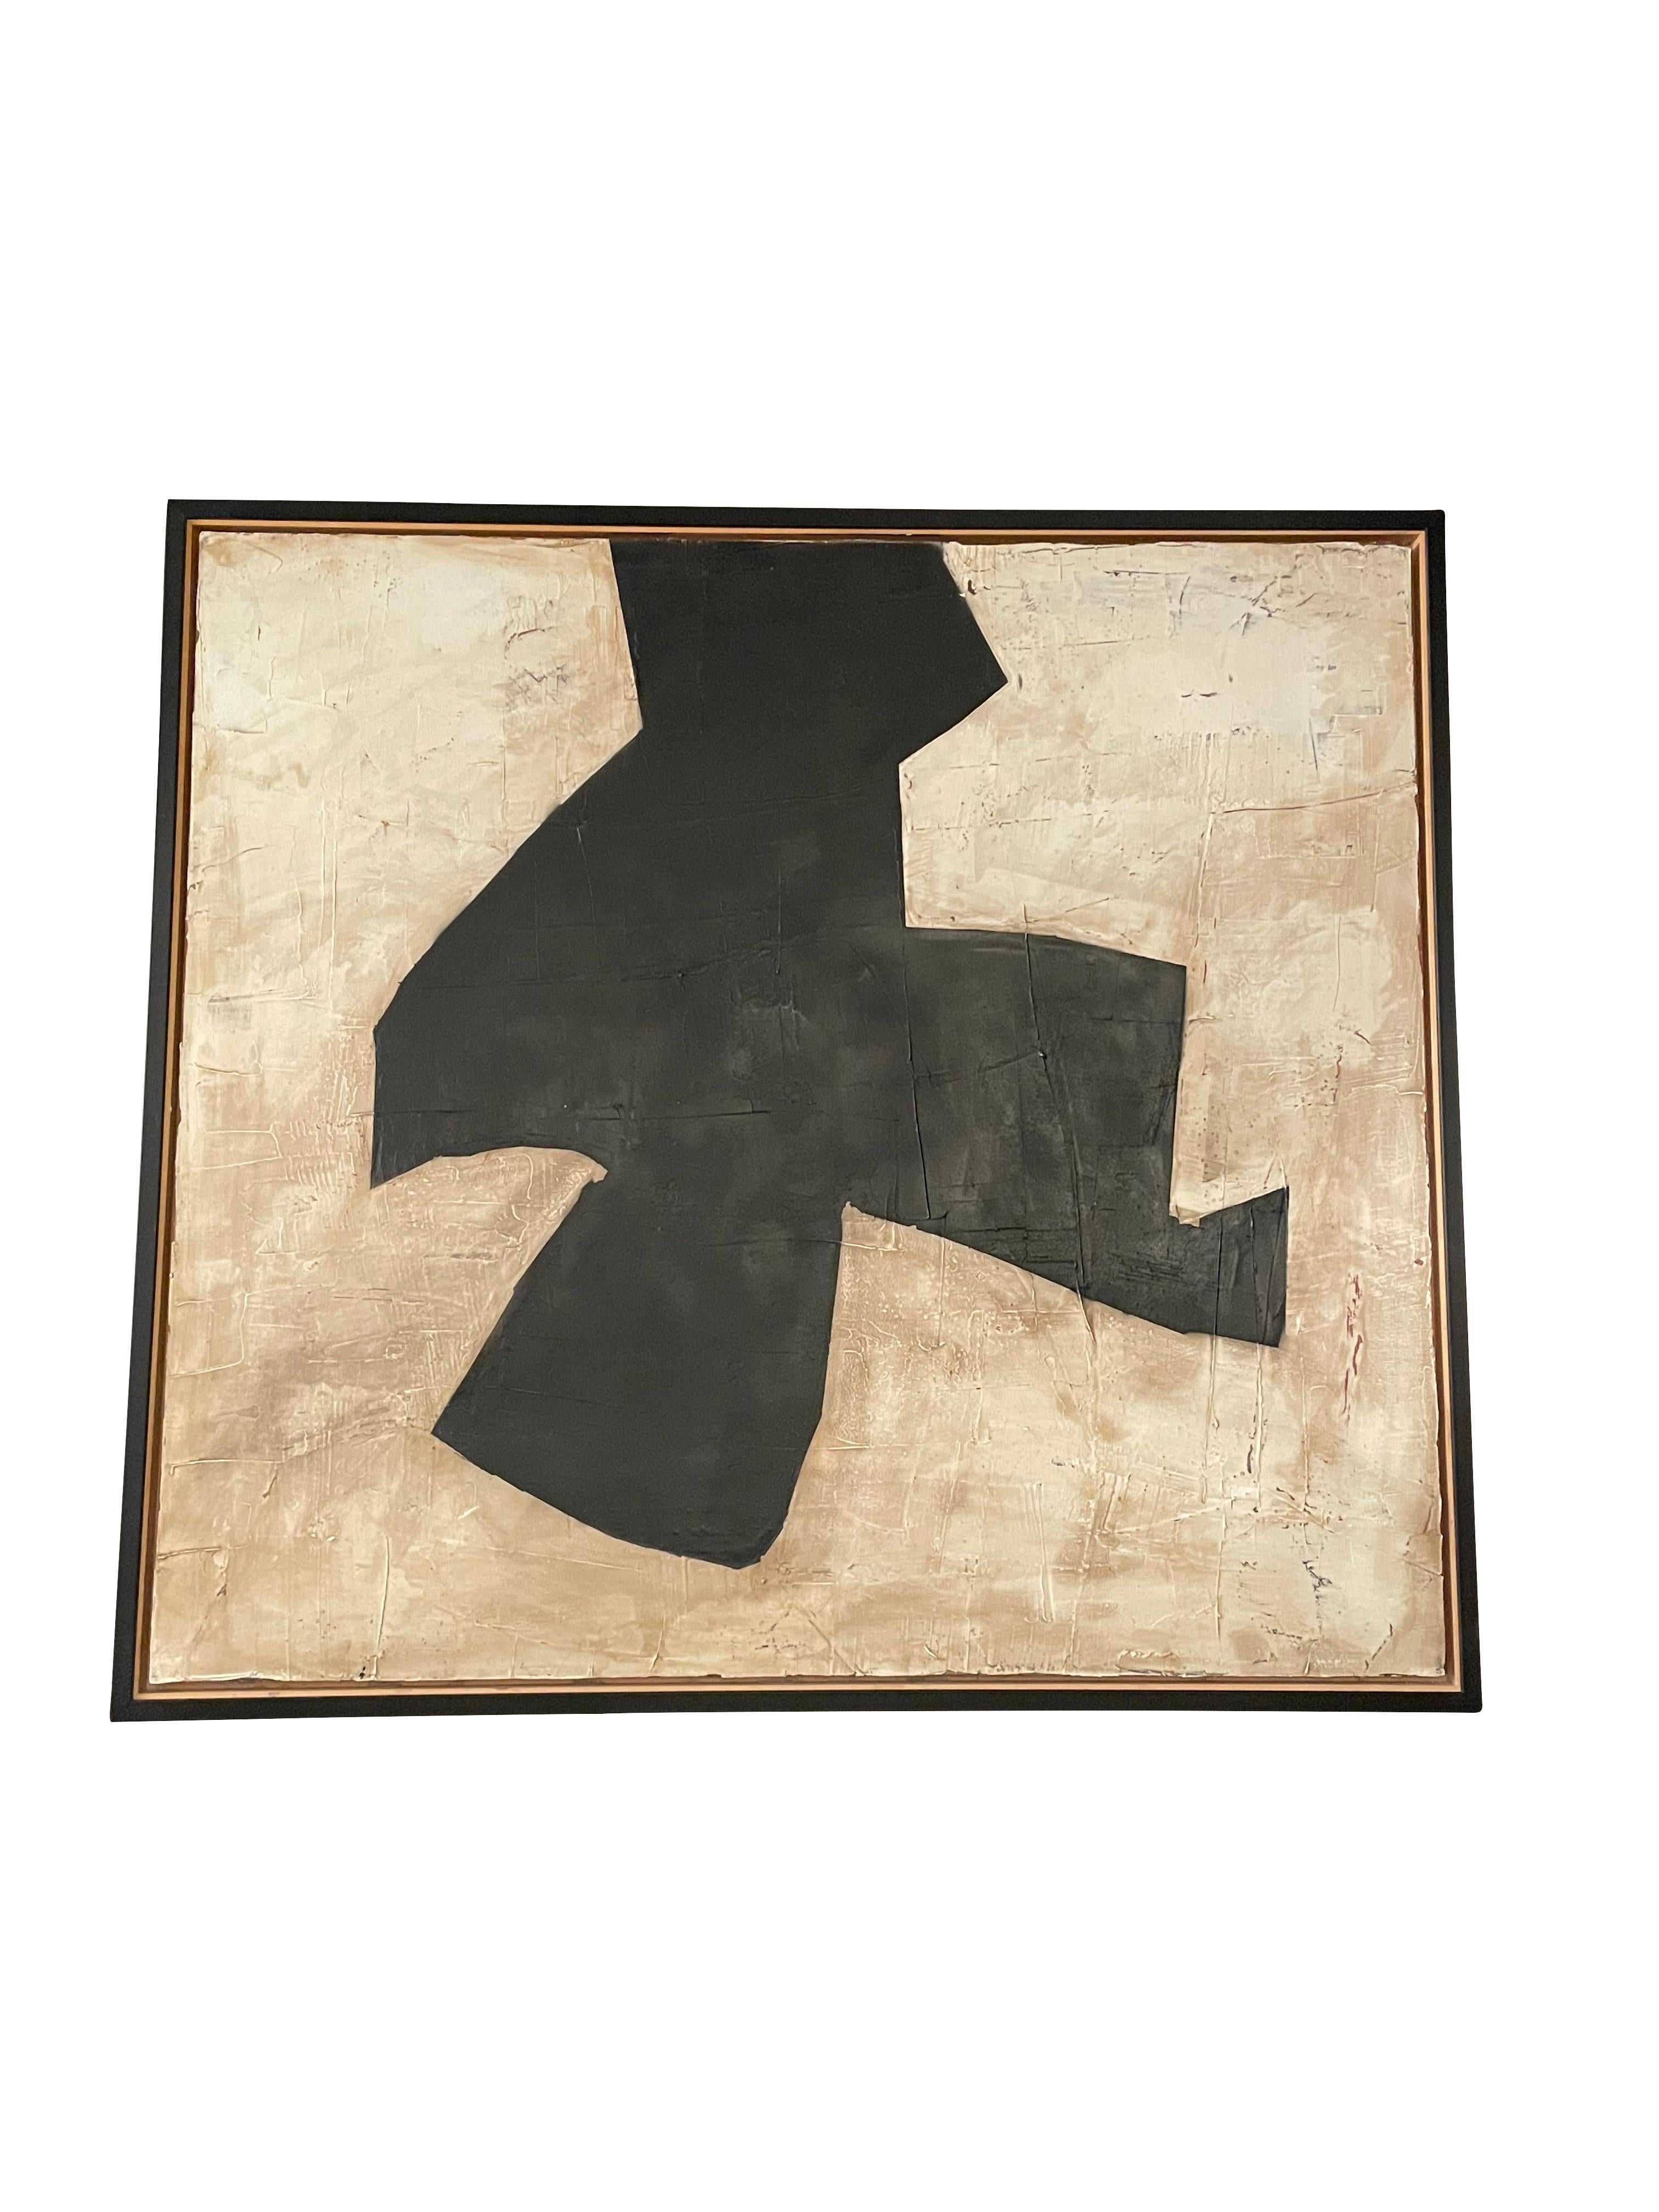 Black and cream contemporary abstract painting by Spanish artist Santiago Castillo.
This large painting is created in oil and stucco on wood. The stucco and a combination of matte and gloss paint finish create an interesting textural effect.
The